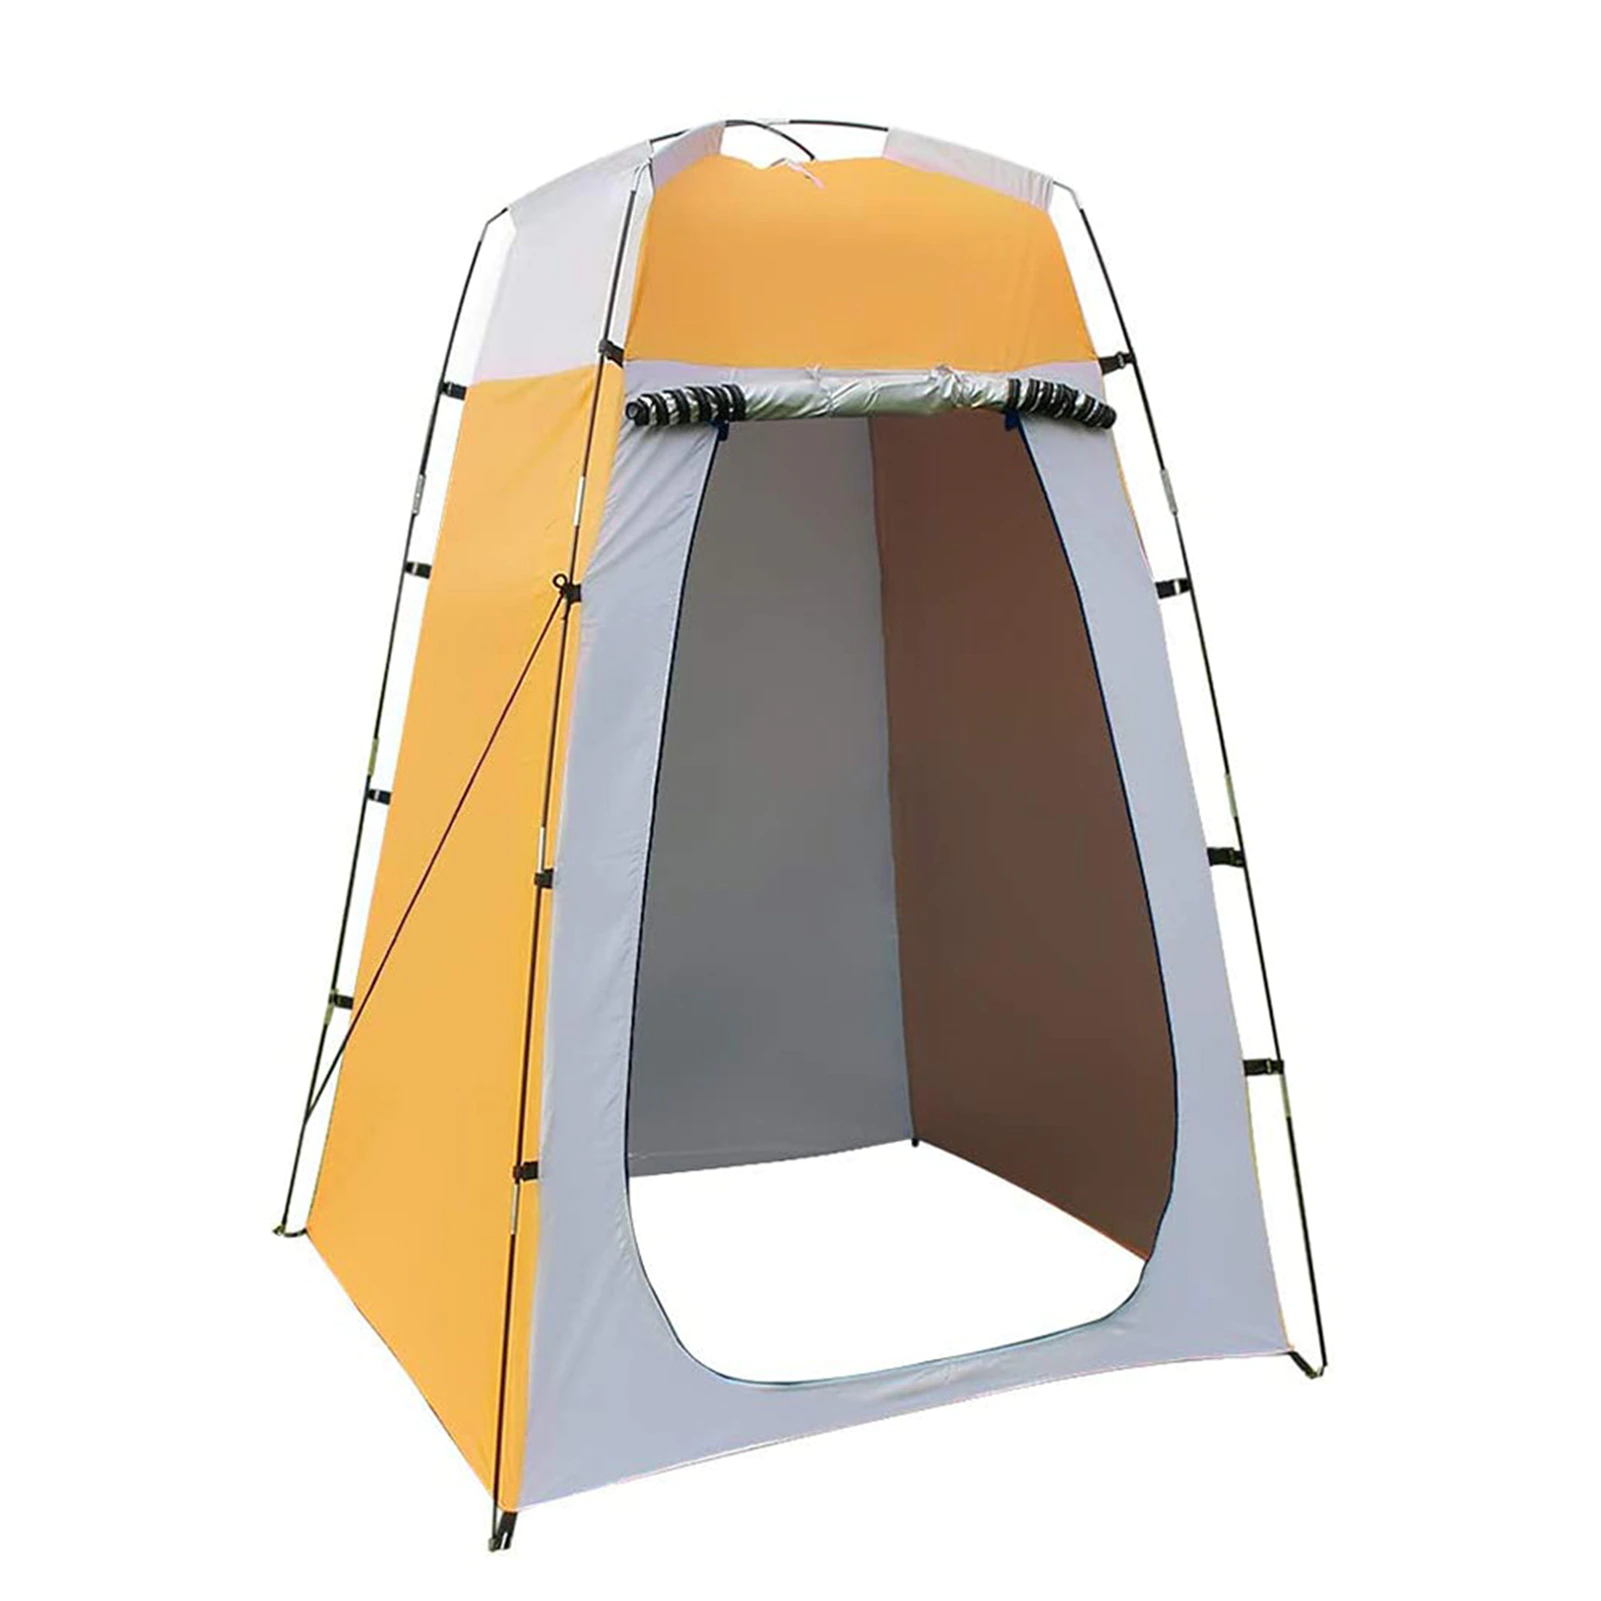 Cheap Goat Tents Outdoor Shower Bath Tent Camping Privacy Toilet Tent Portable Changing Room Fits One Person Sun Protection Quickly Build Tent